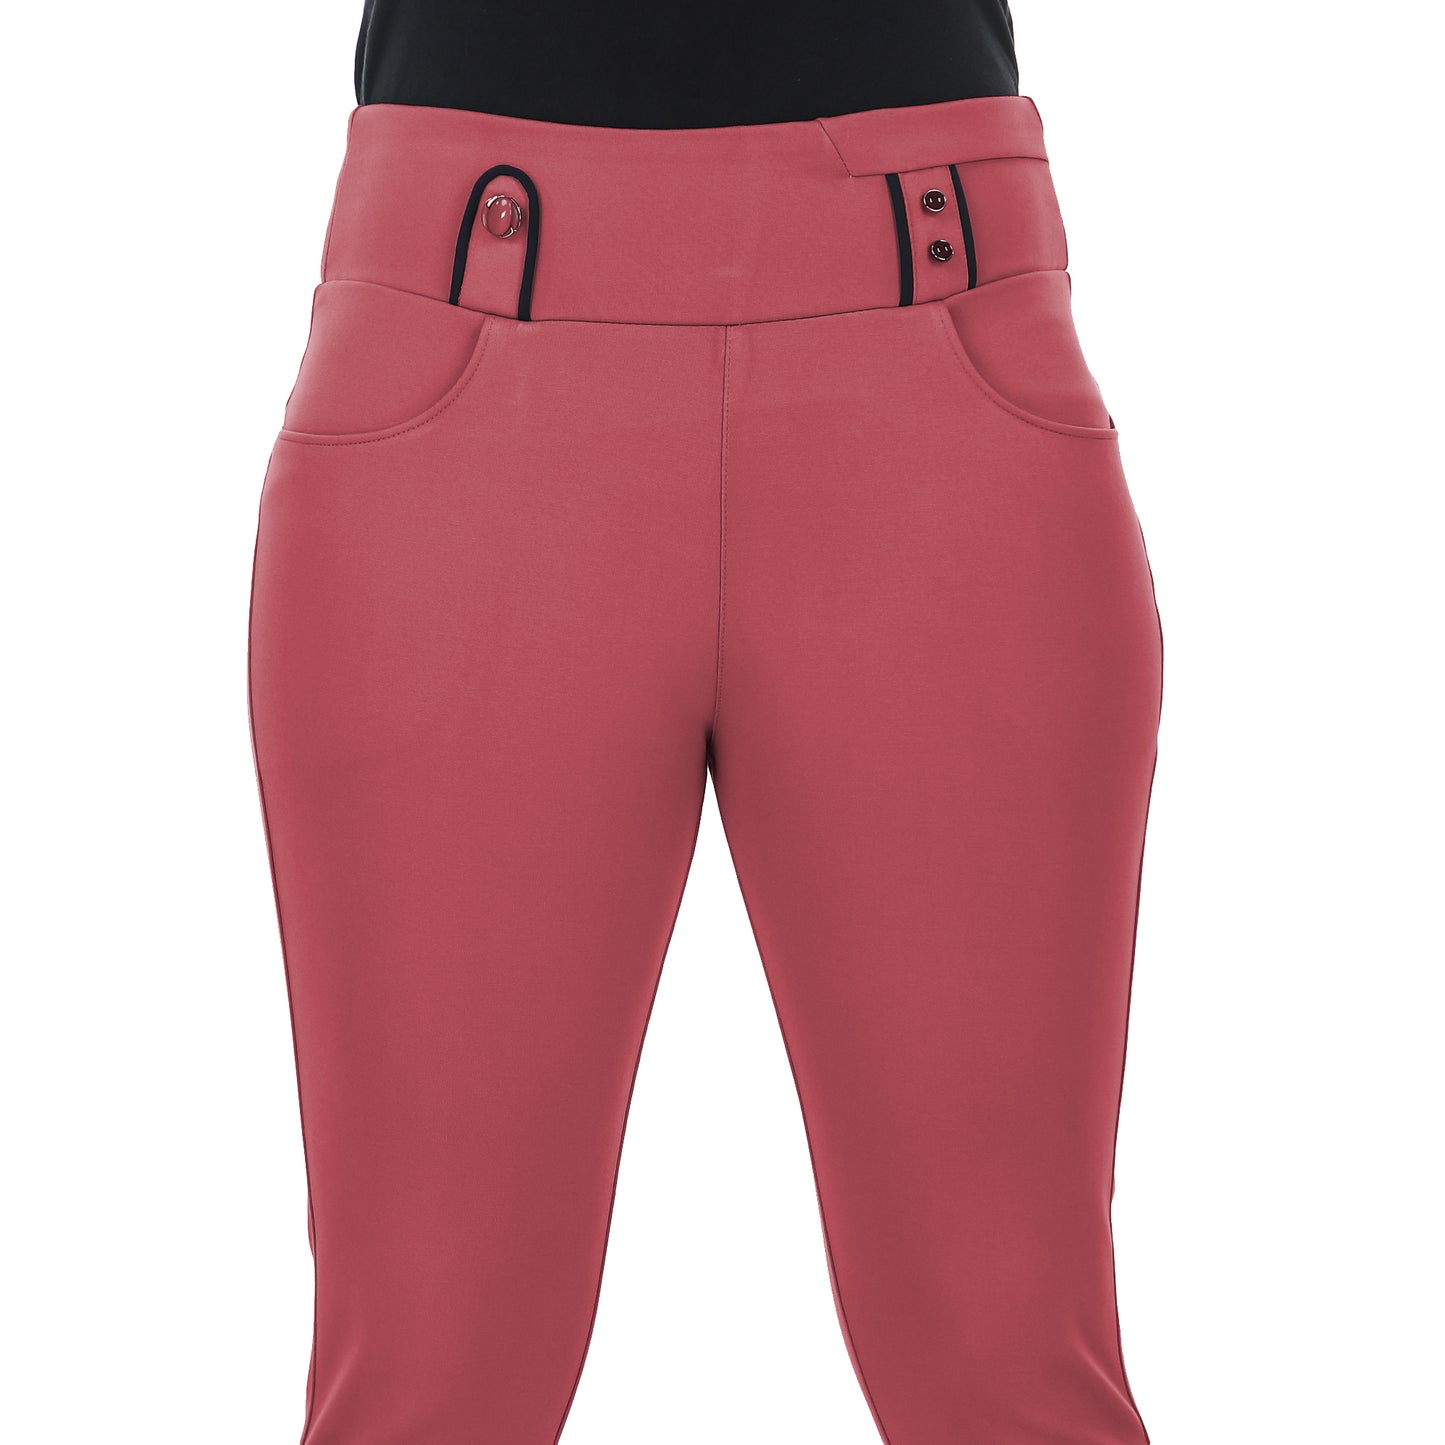 ComfortFit Women's Mid-Waist Jeggings with 2 Front Pockets - LightCoral